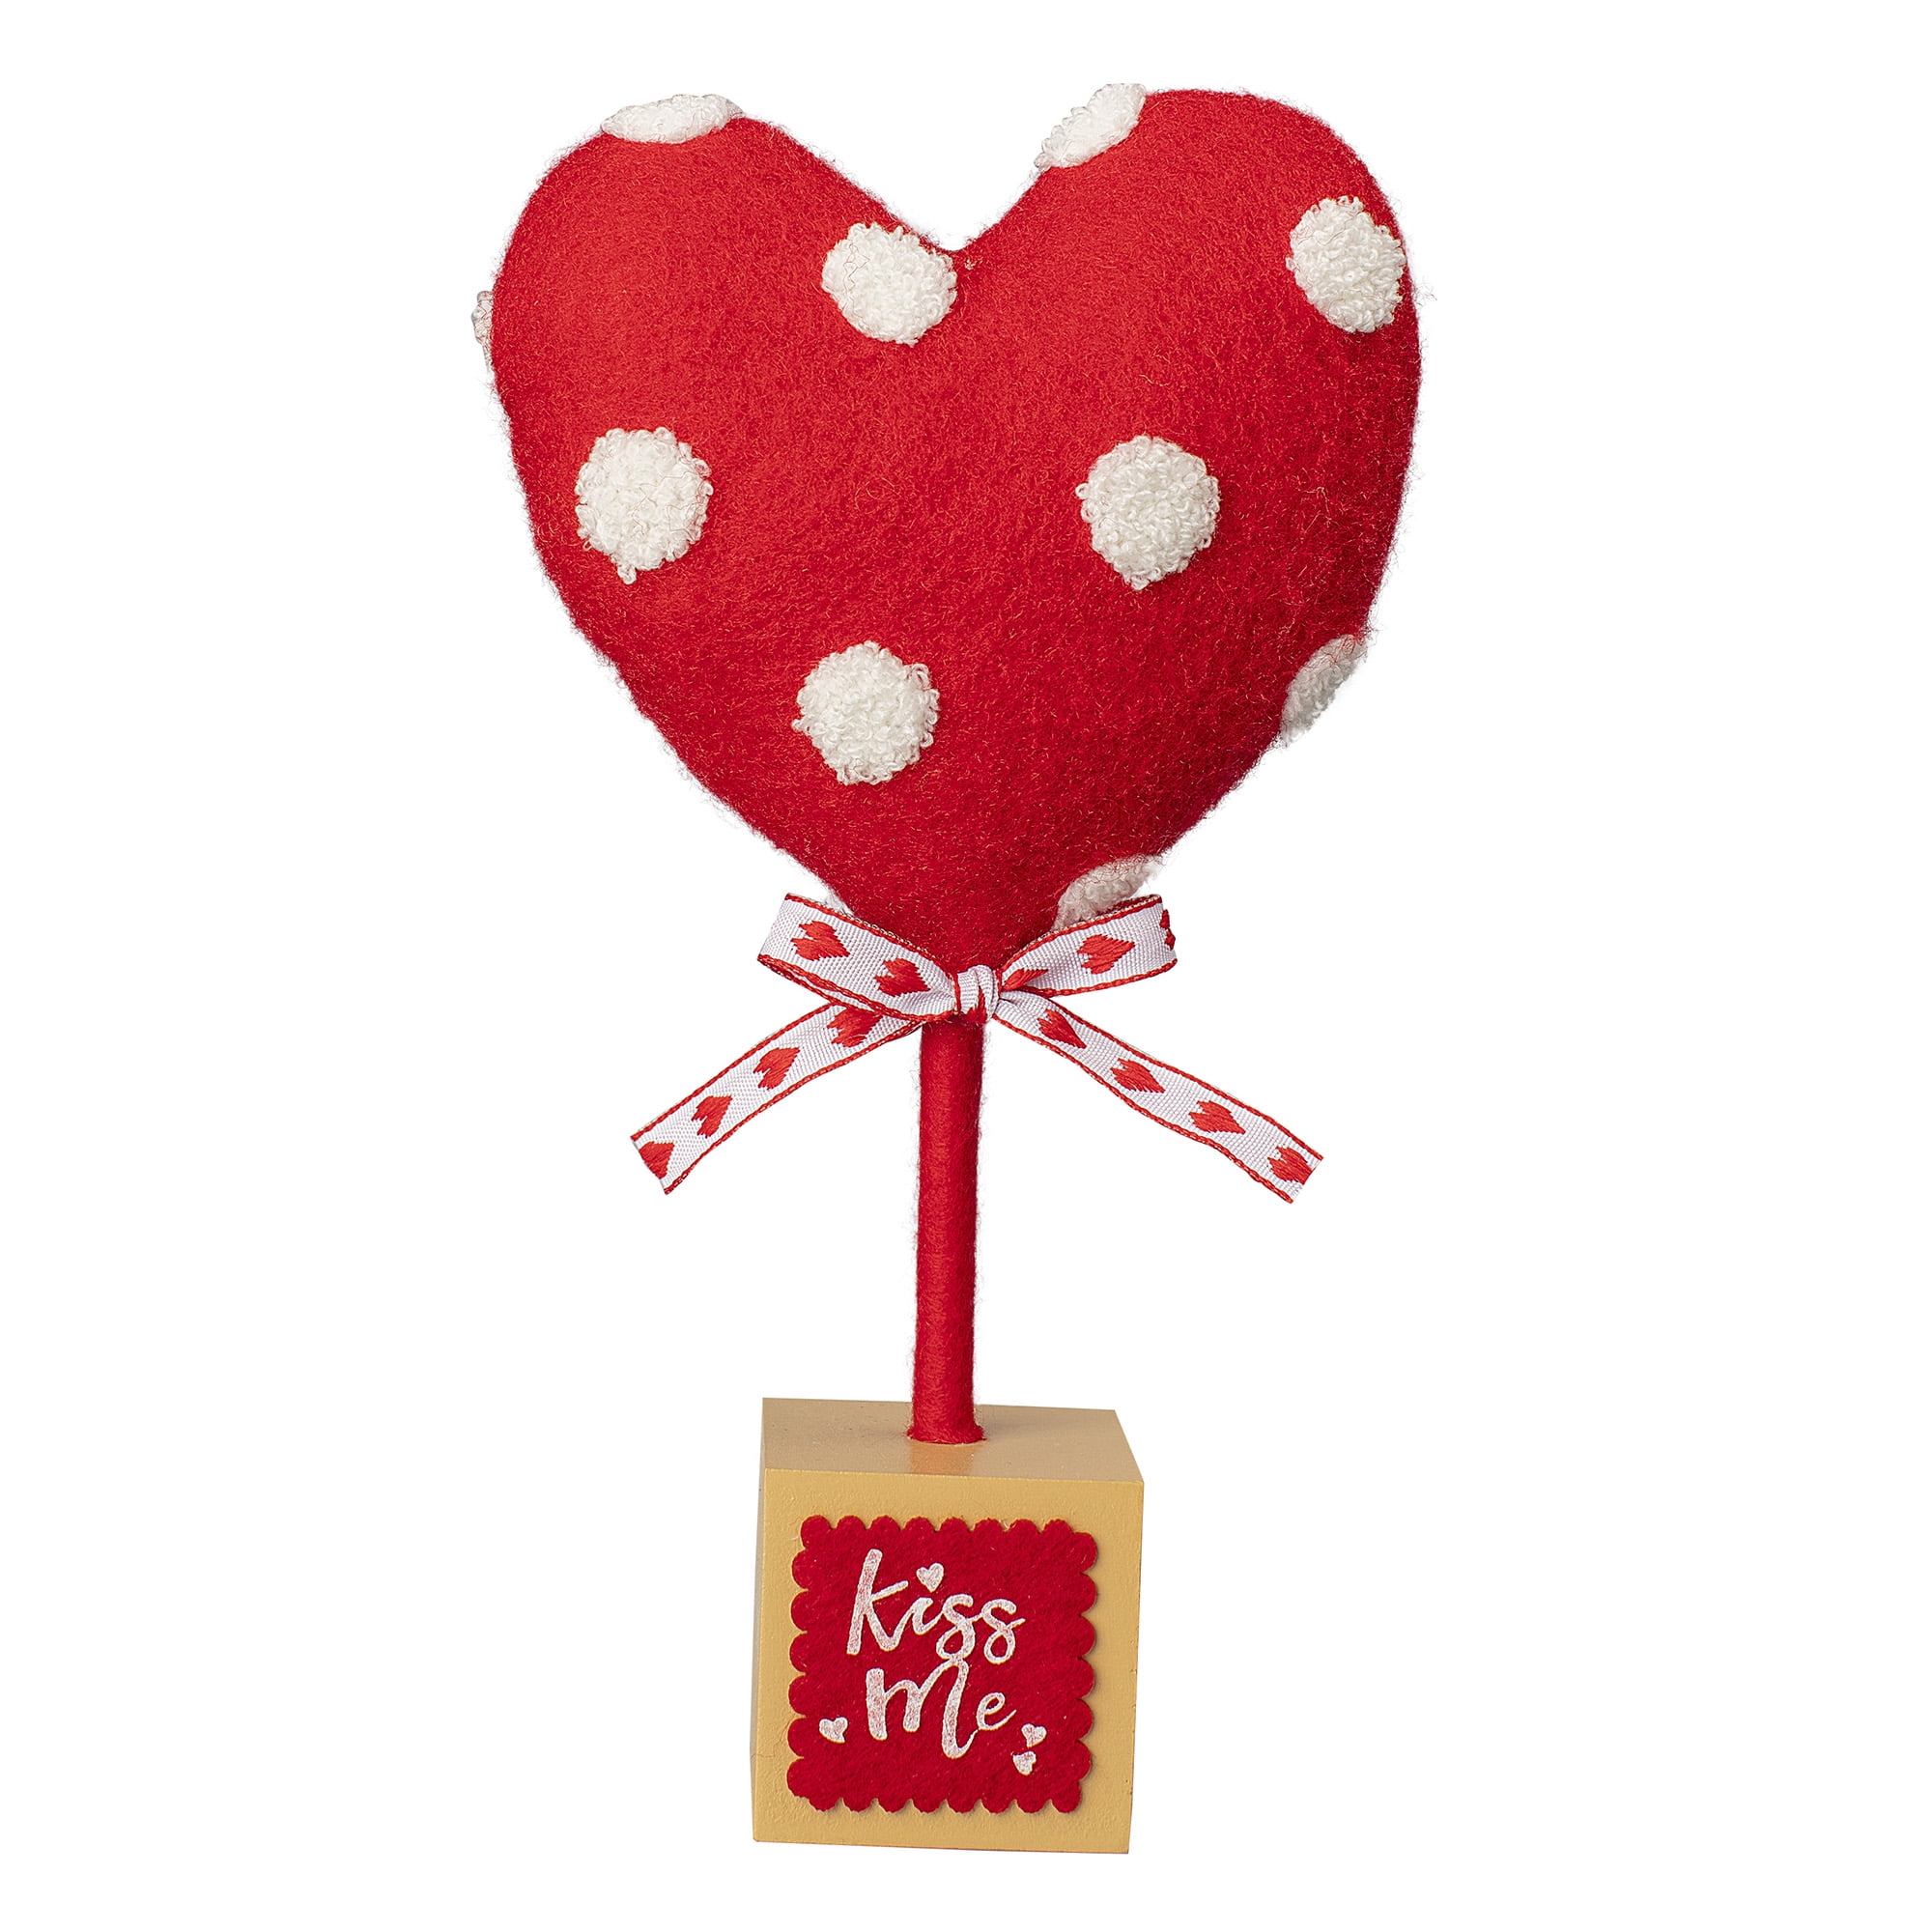 WAY TO CELEBRATE! Way to Celebrate Valentine's Day Large Red Fabric Heart Tabletop Decoration, 9.5" Tall